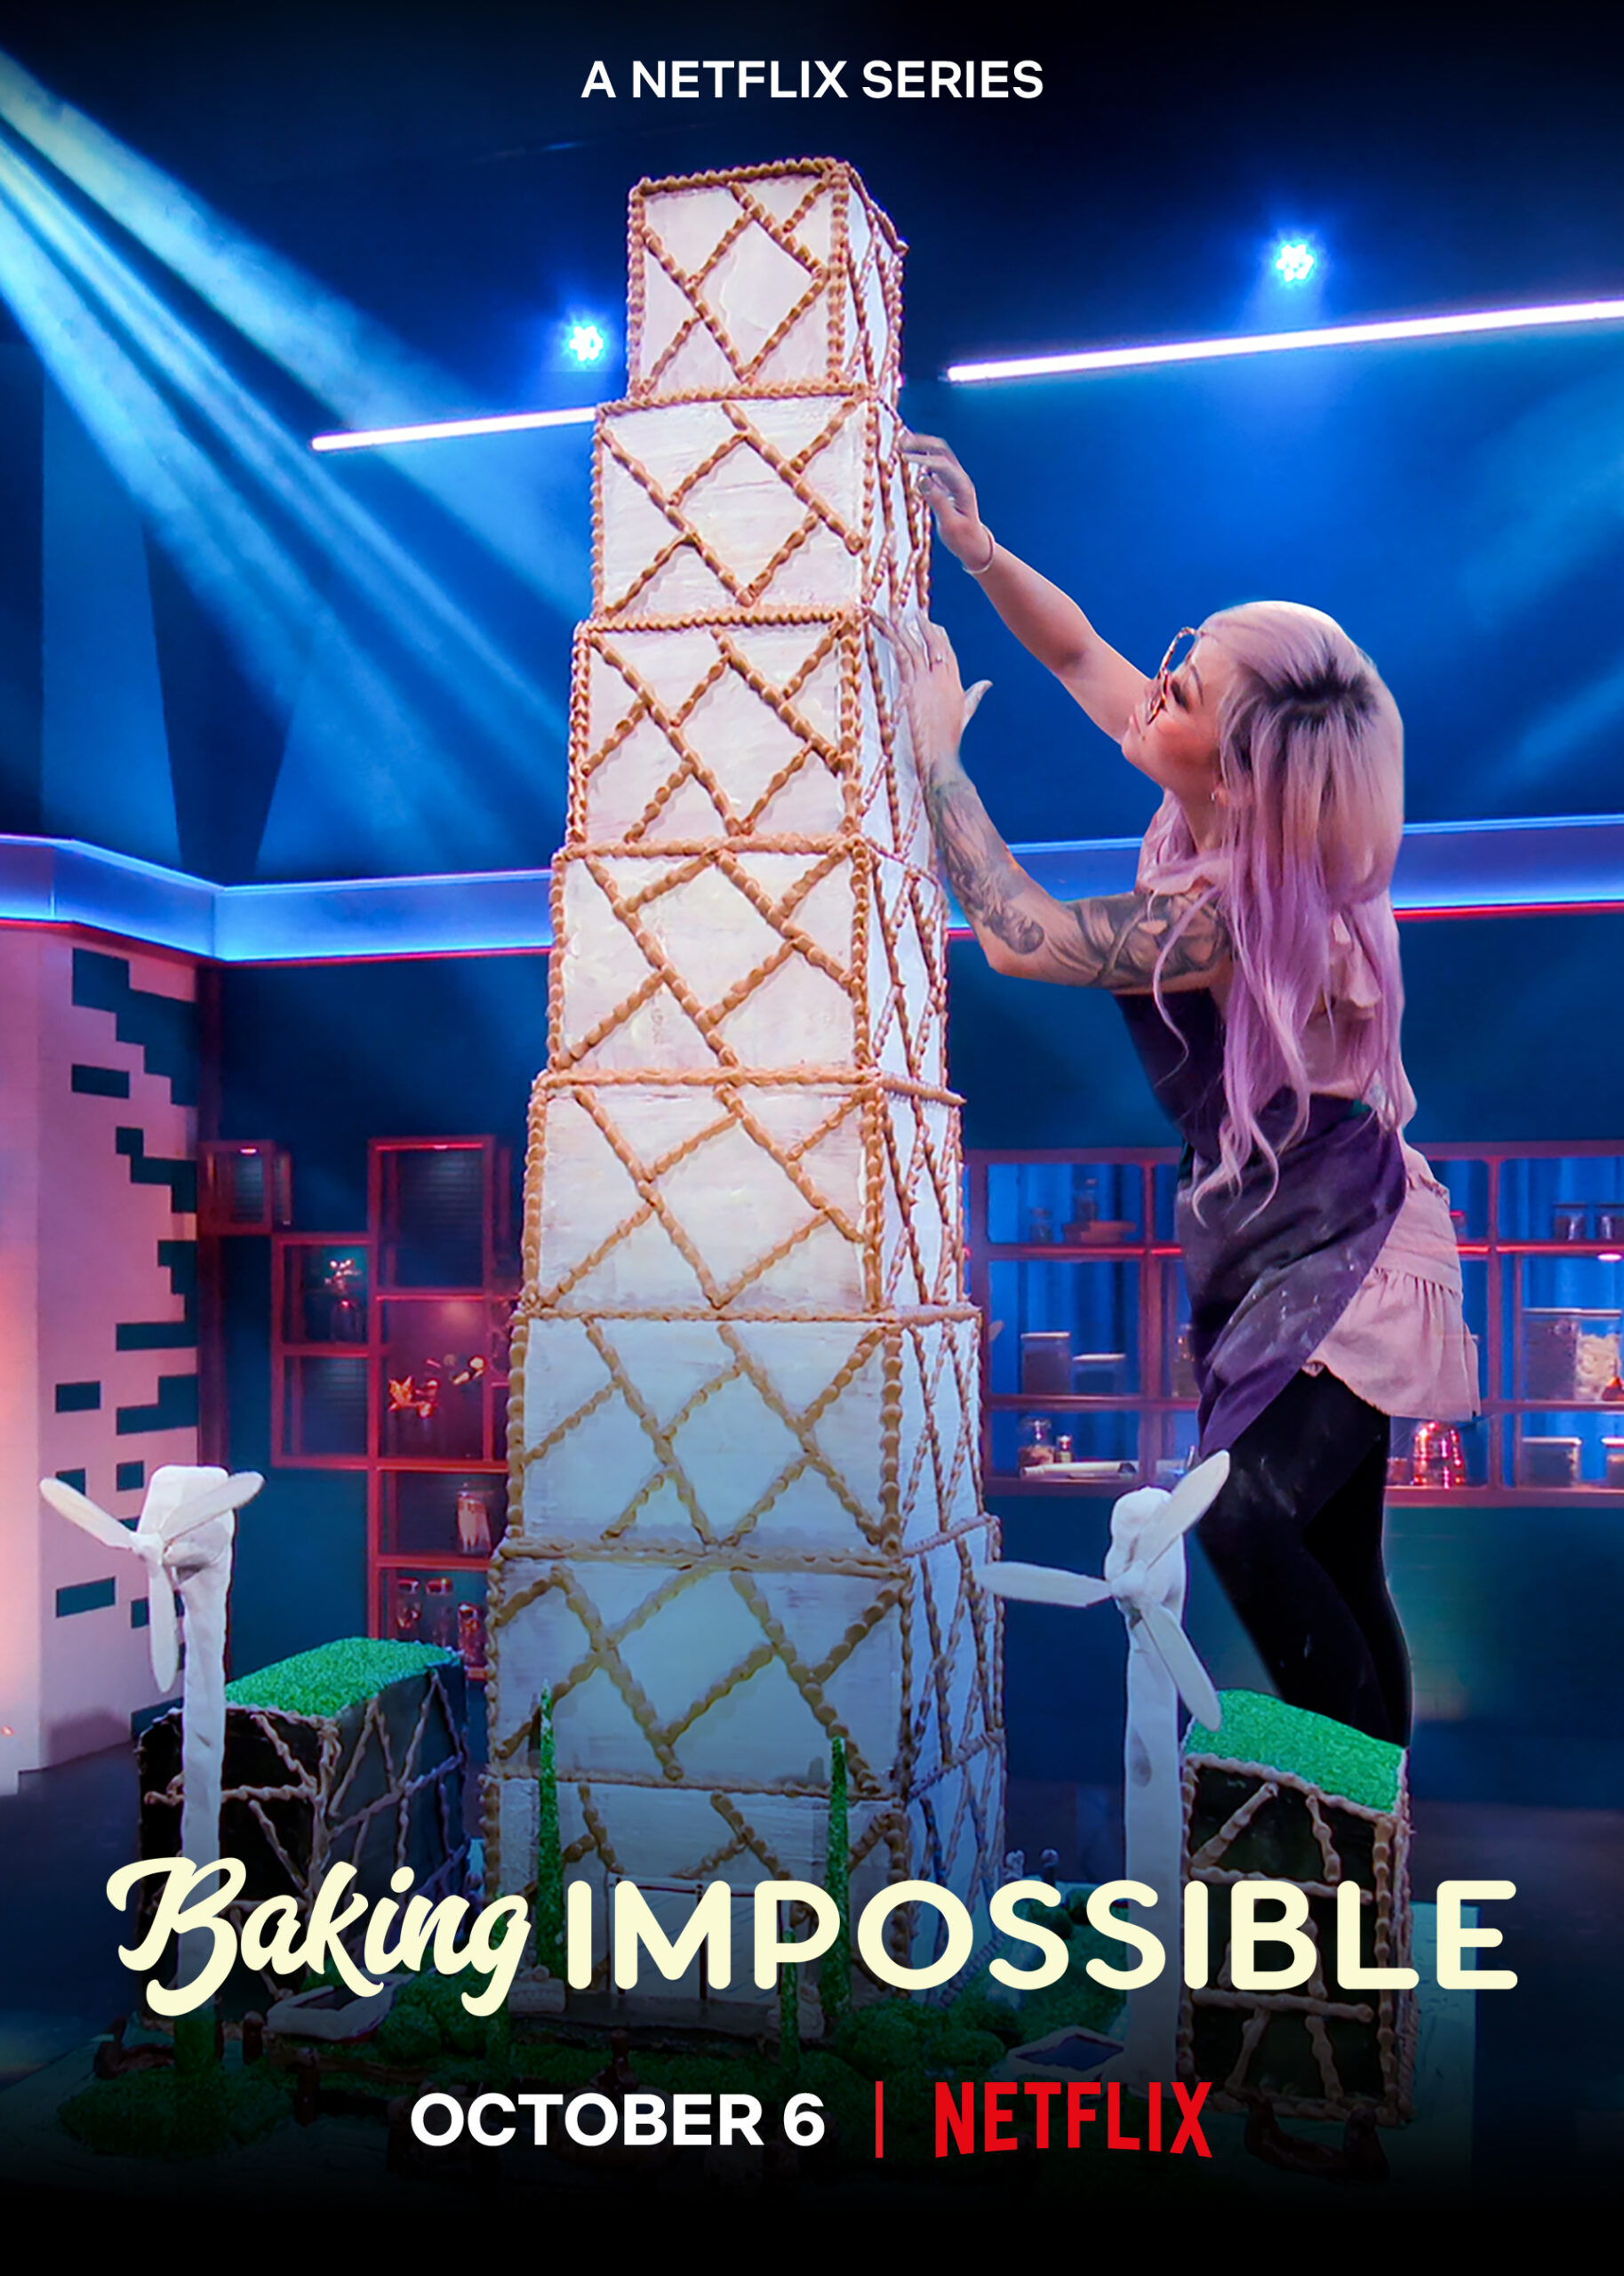 Is Baking Impossible on Netflix